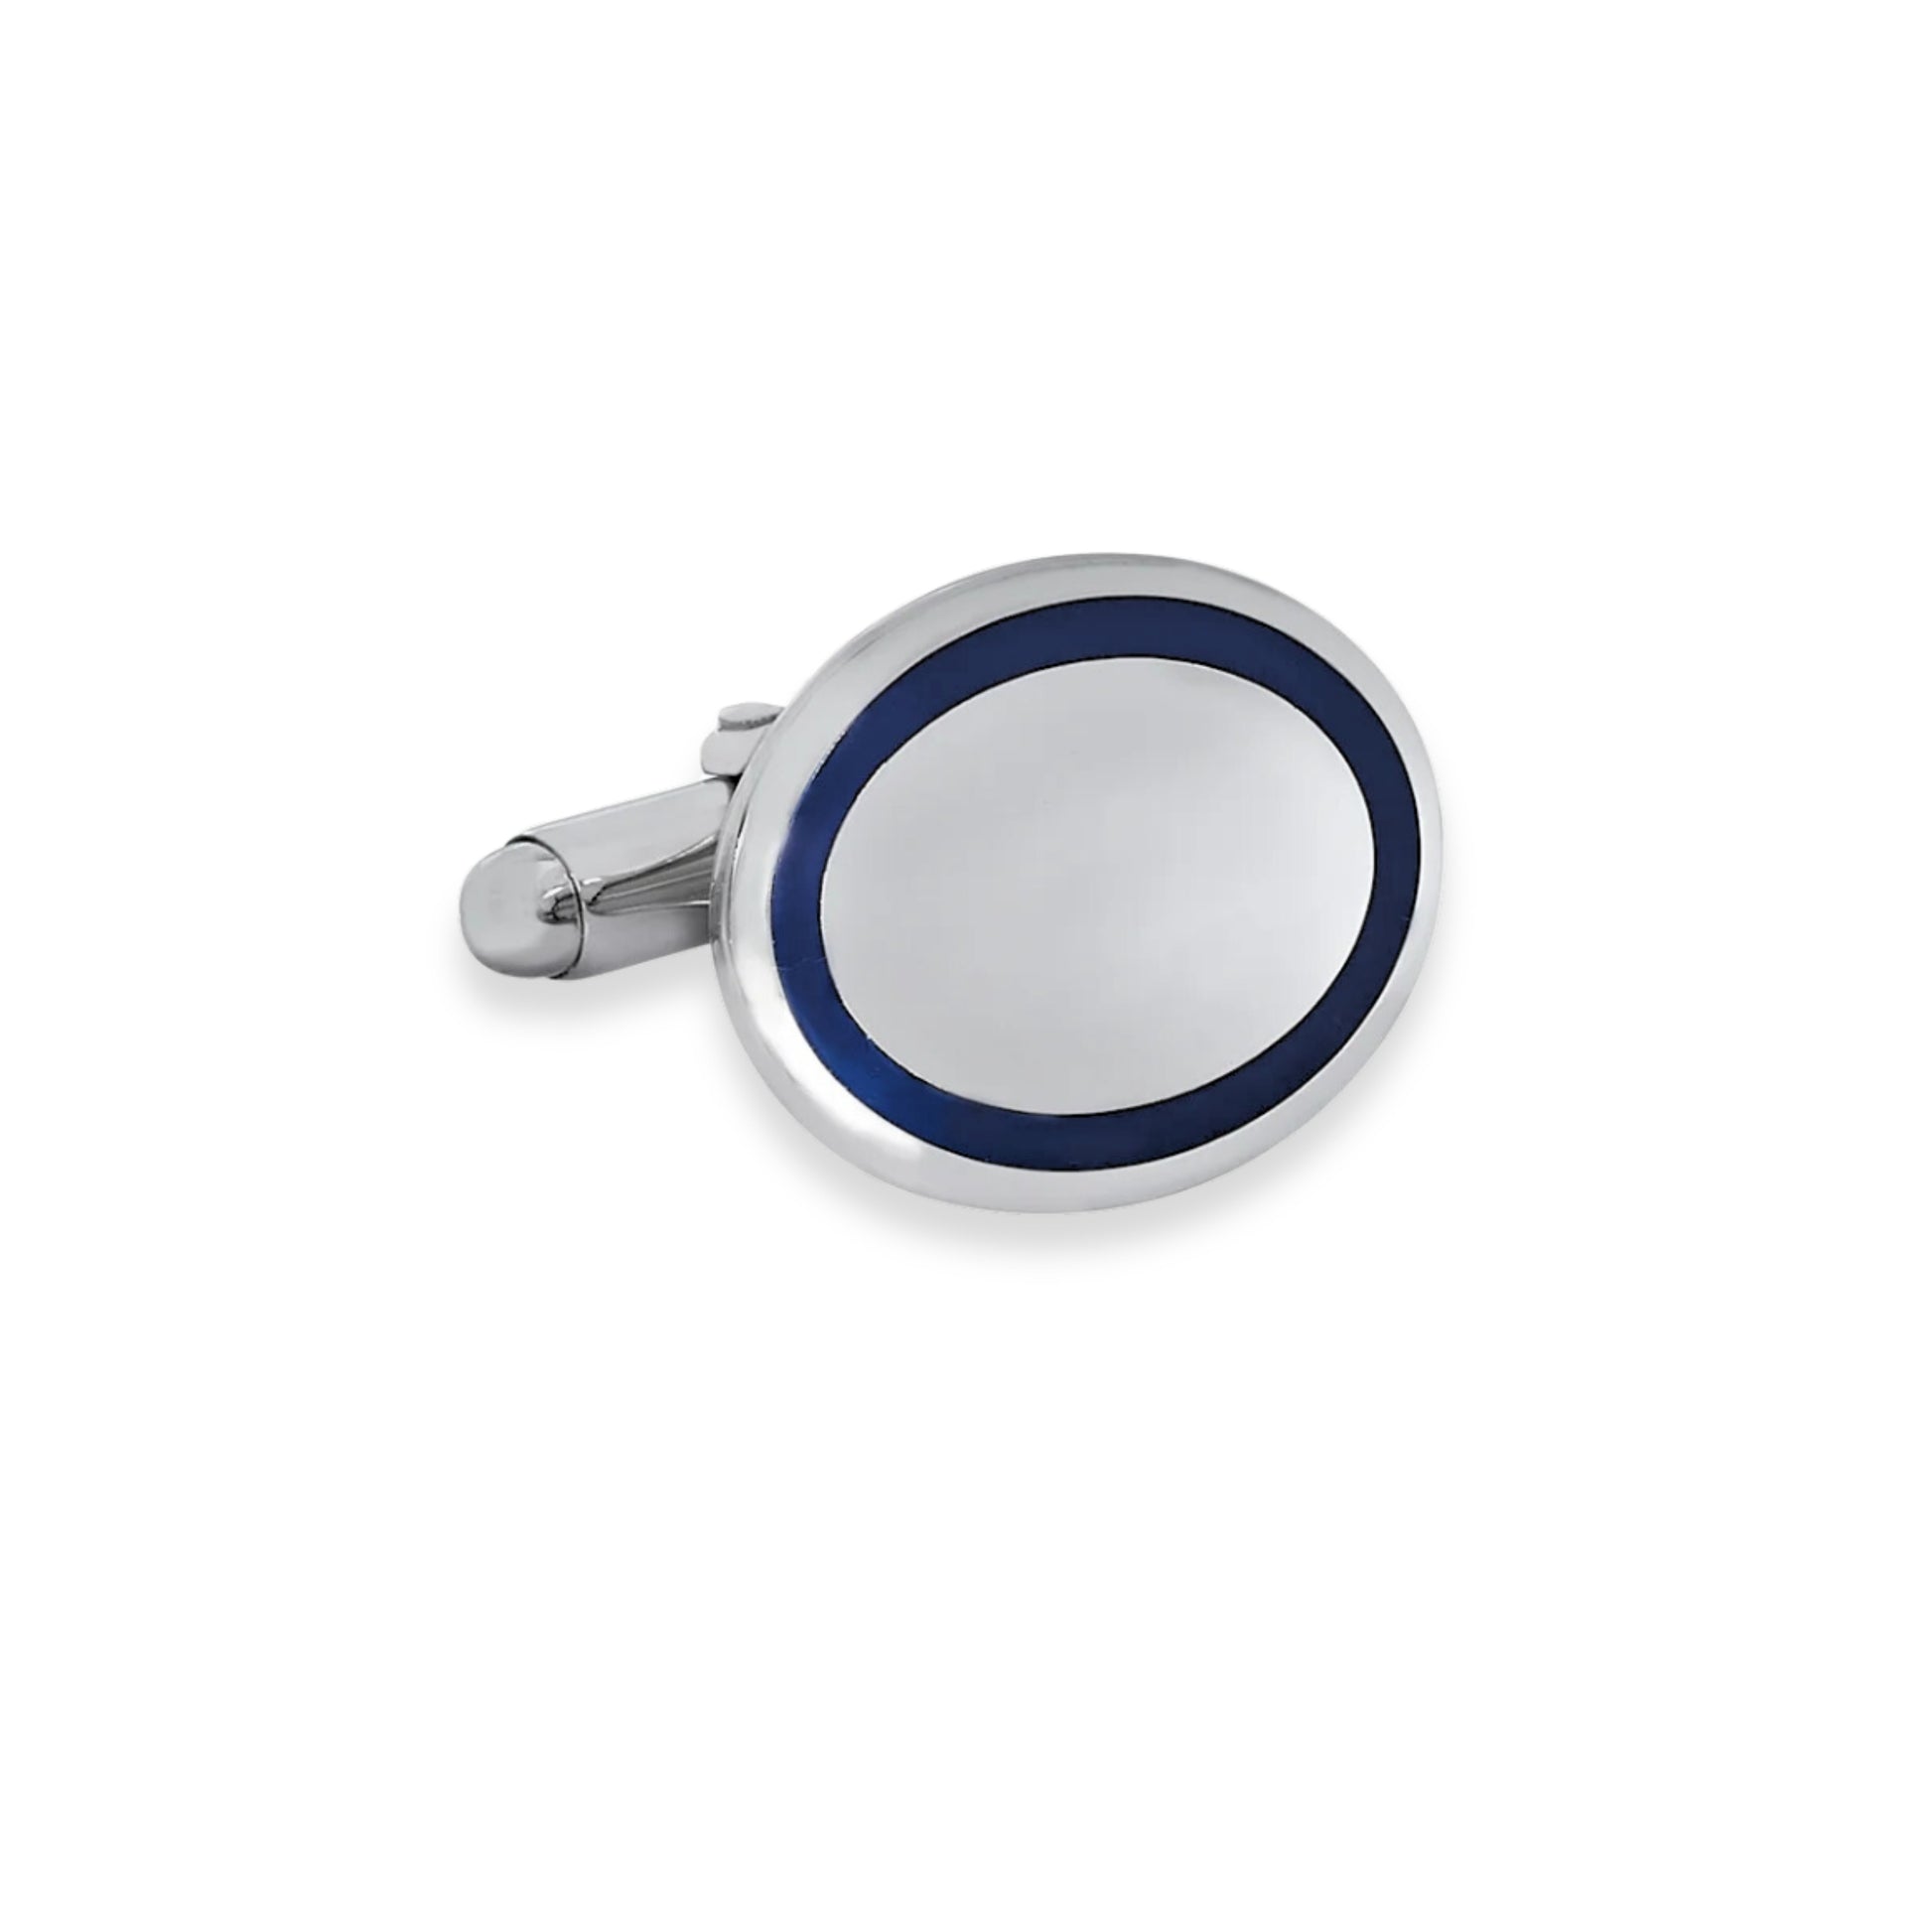 Sterling Silver Oval Cufflinks with Blue Trim